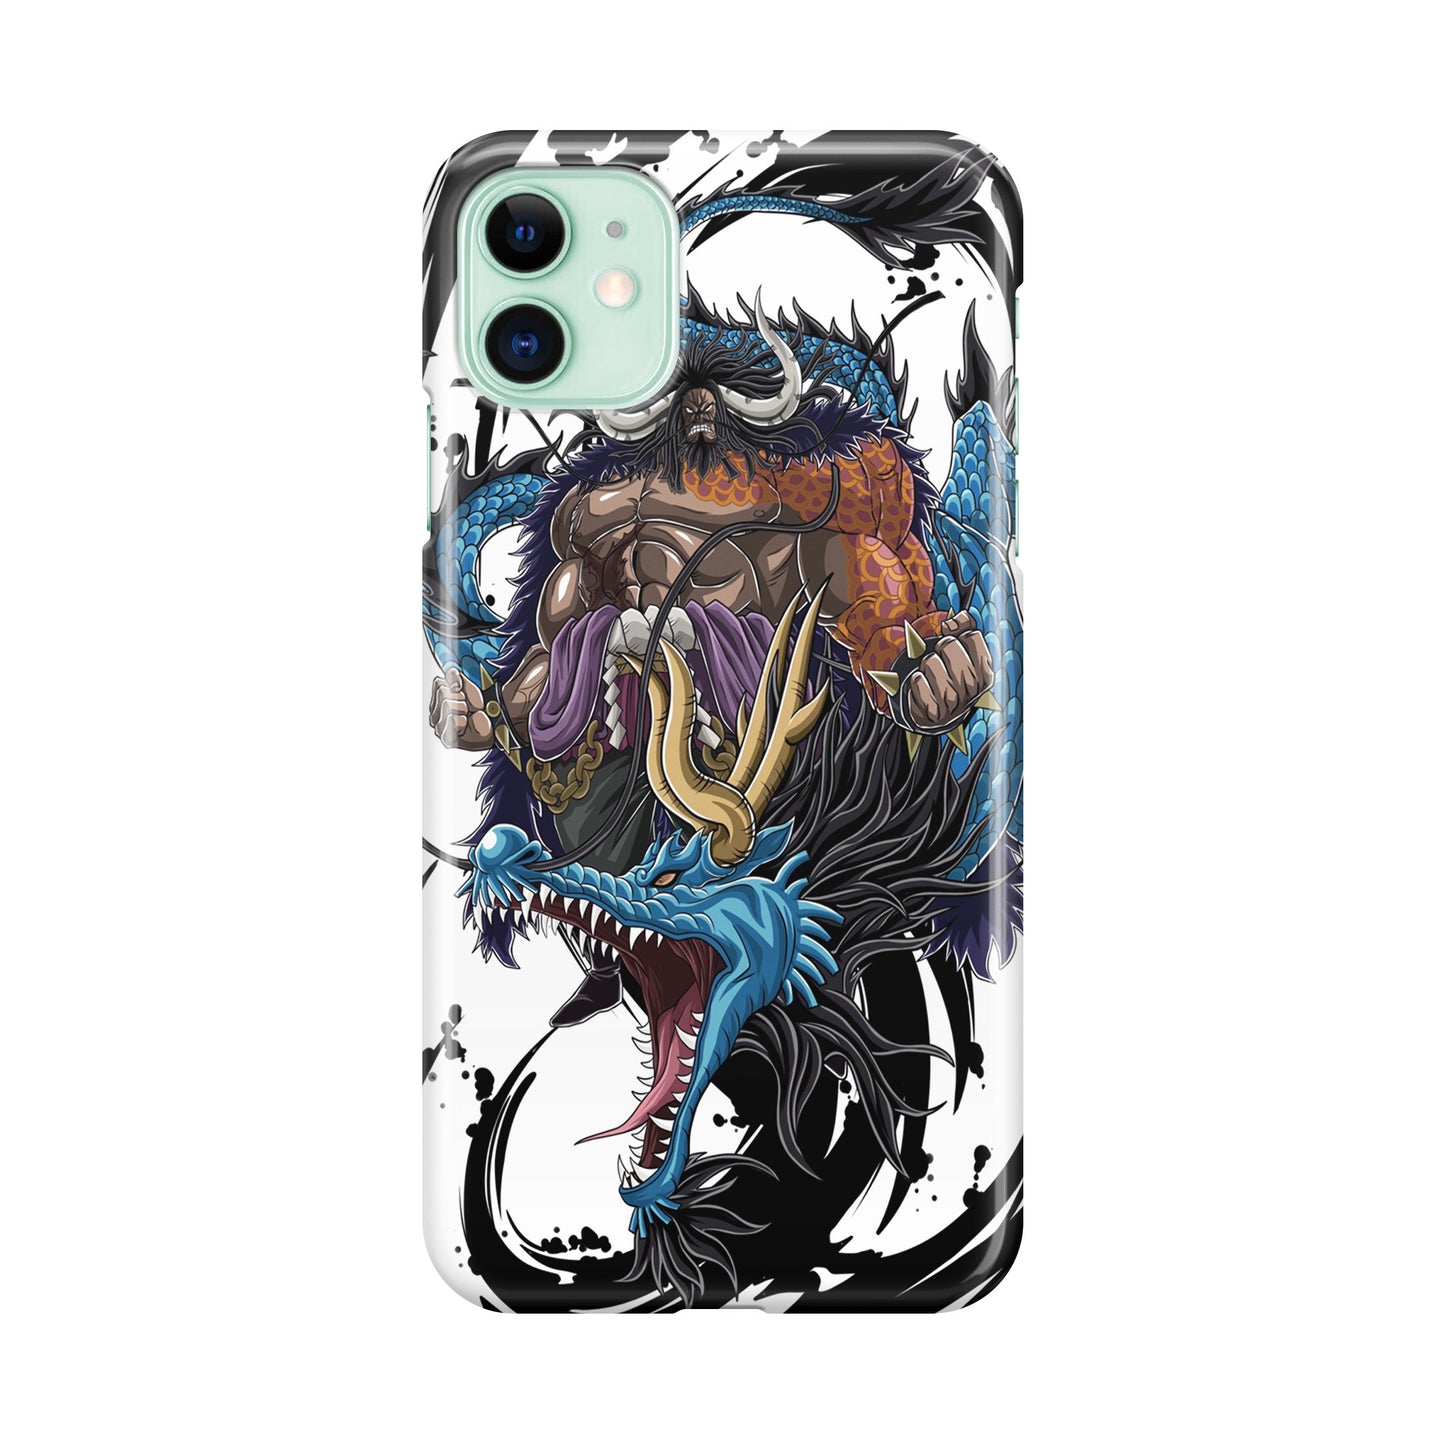 Kaido And The Dragon iPhone 12 Case